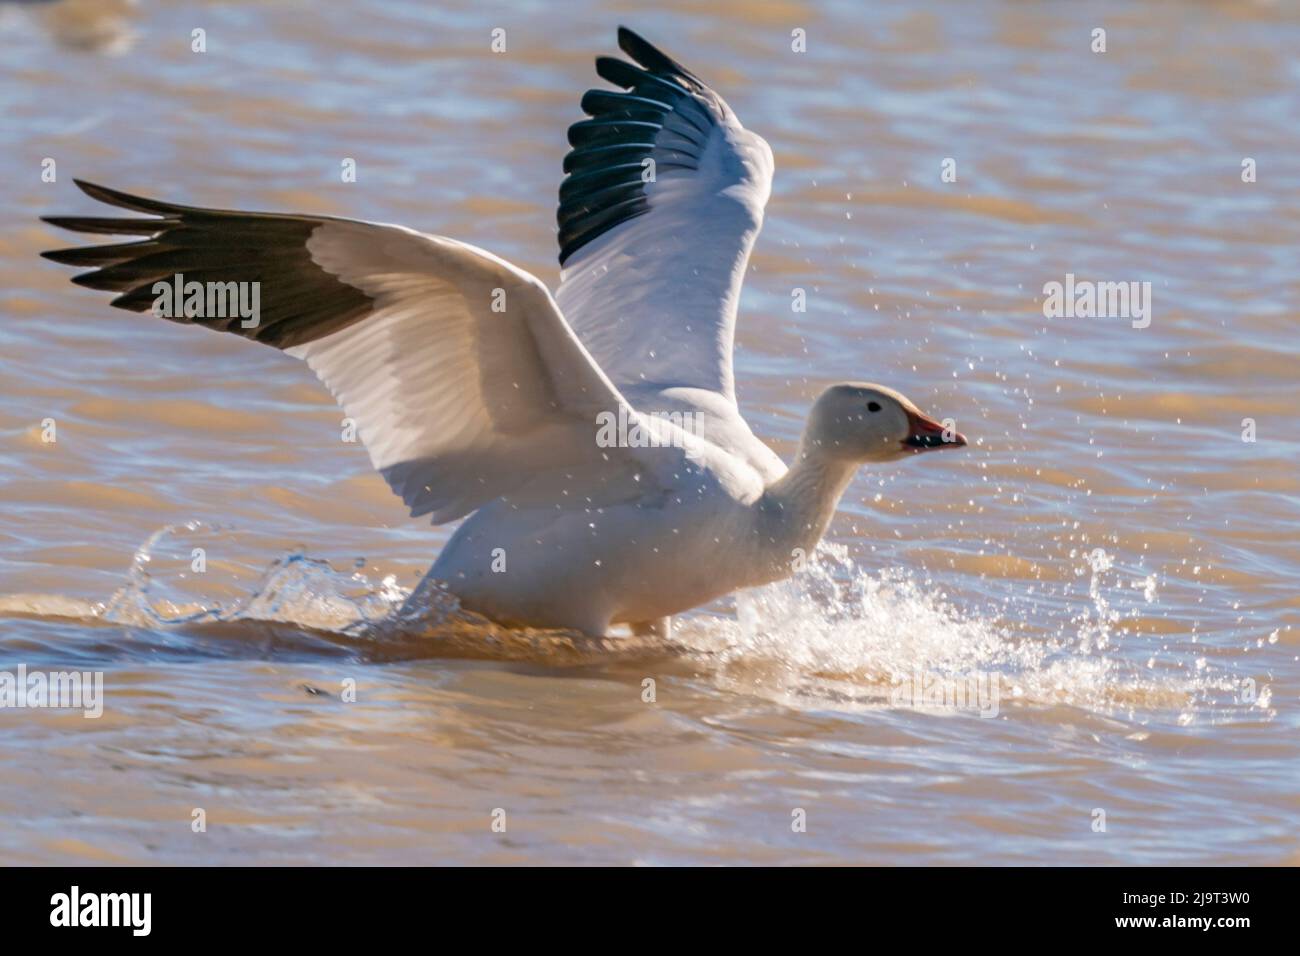 USA, New Mexico, Bosque Del Apache National Wildlife Refuge. Snow goose landing in water. Stock Photo